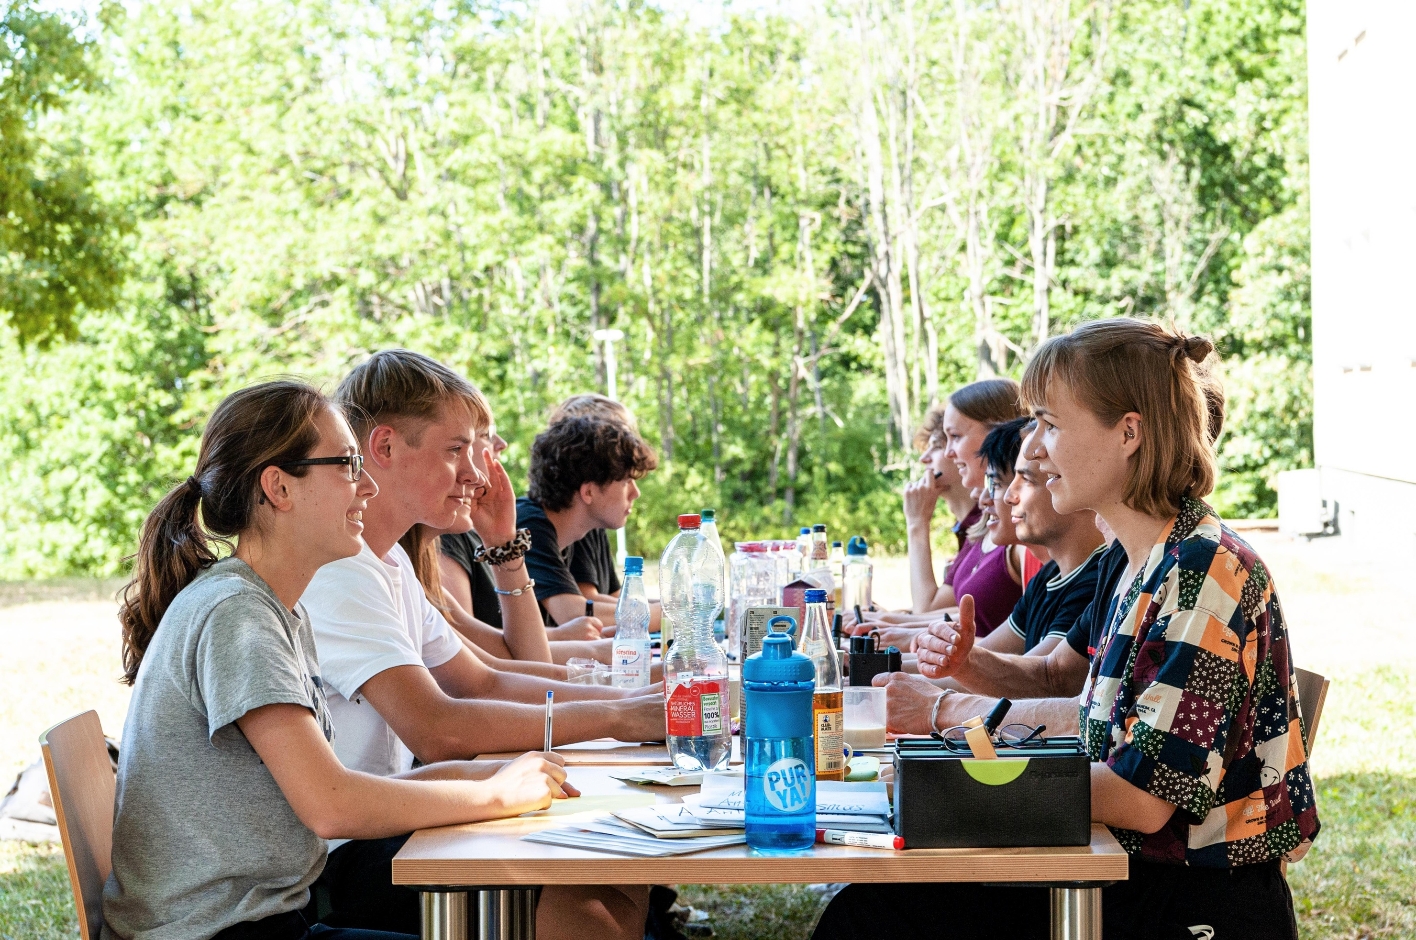 Several young people can be seen at a table near the youth meeting center, animatedly discussing with each other. Besides drinks, educational material is scattered on the tables.